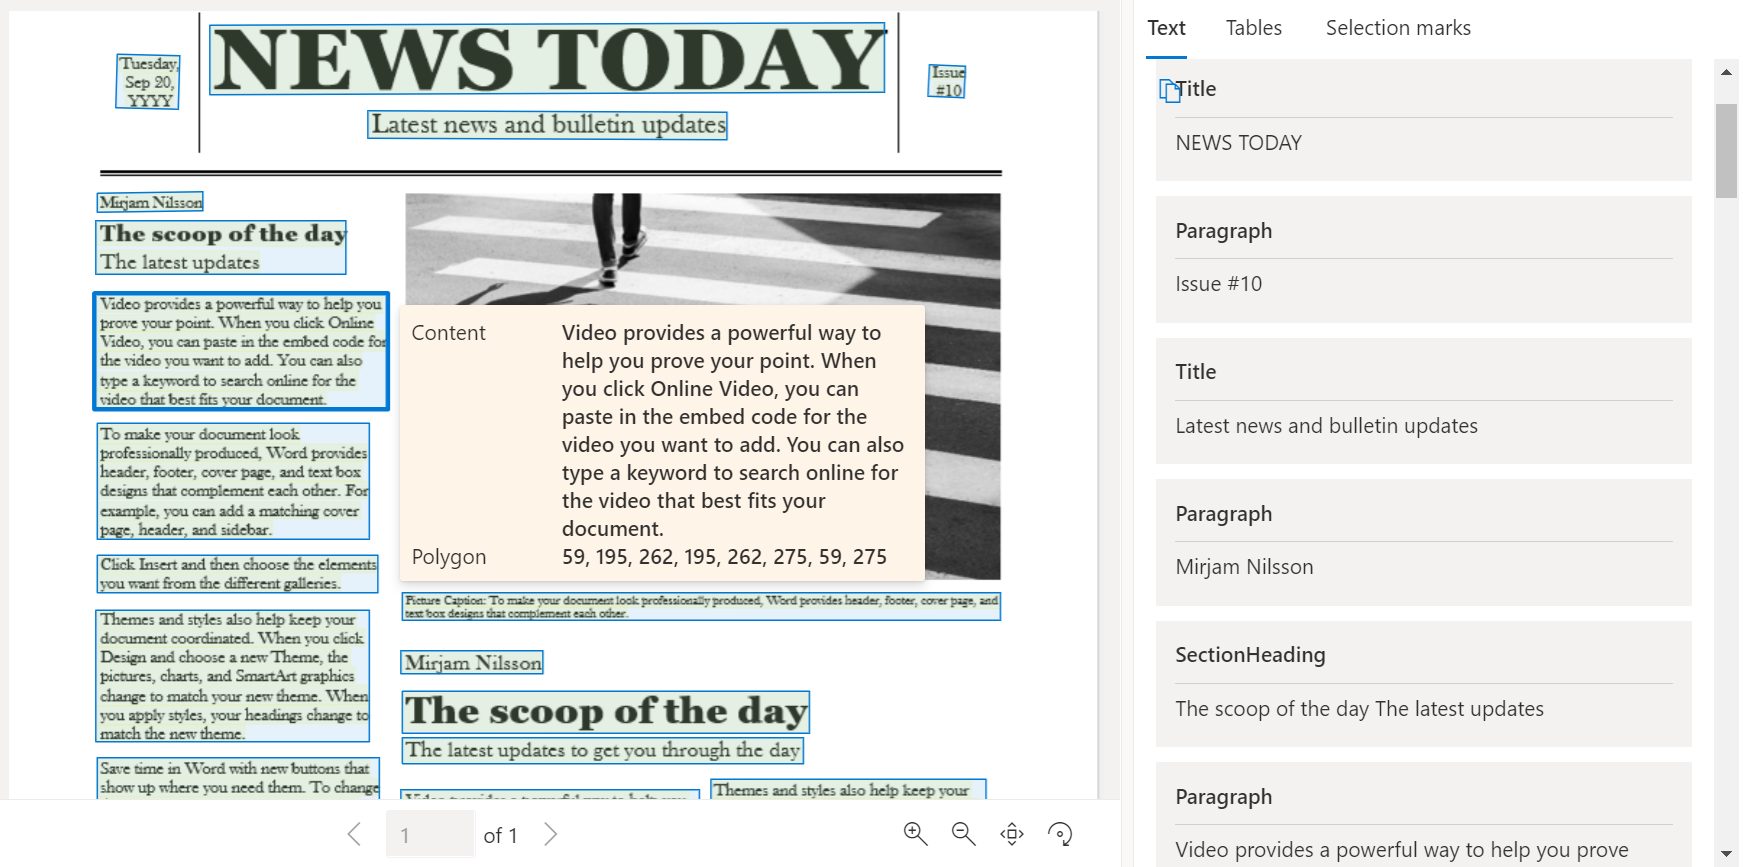 Screenshot of sample newspaper page processed using Form Recognizer Studio.